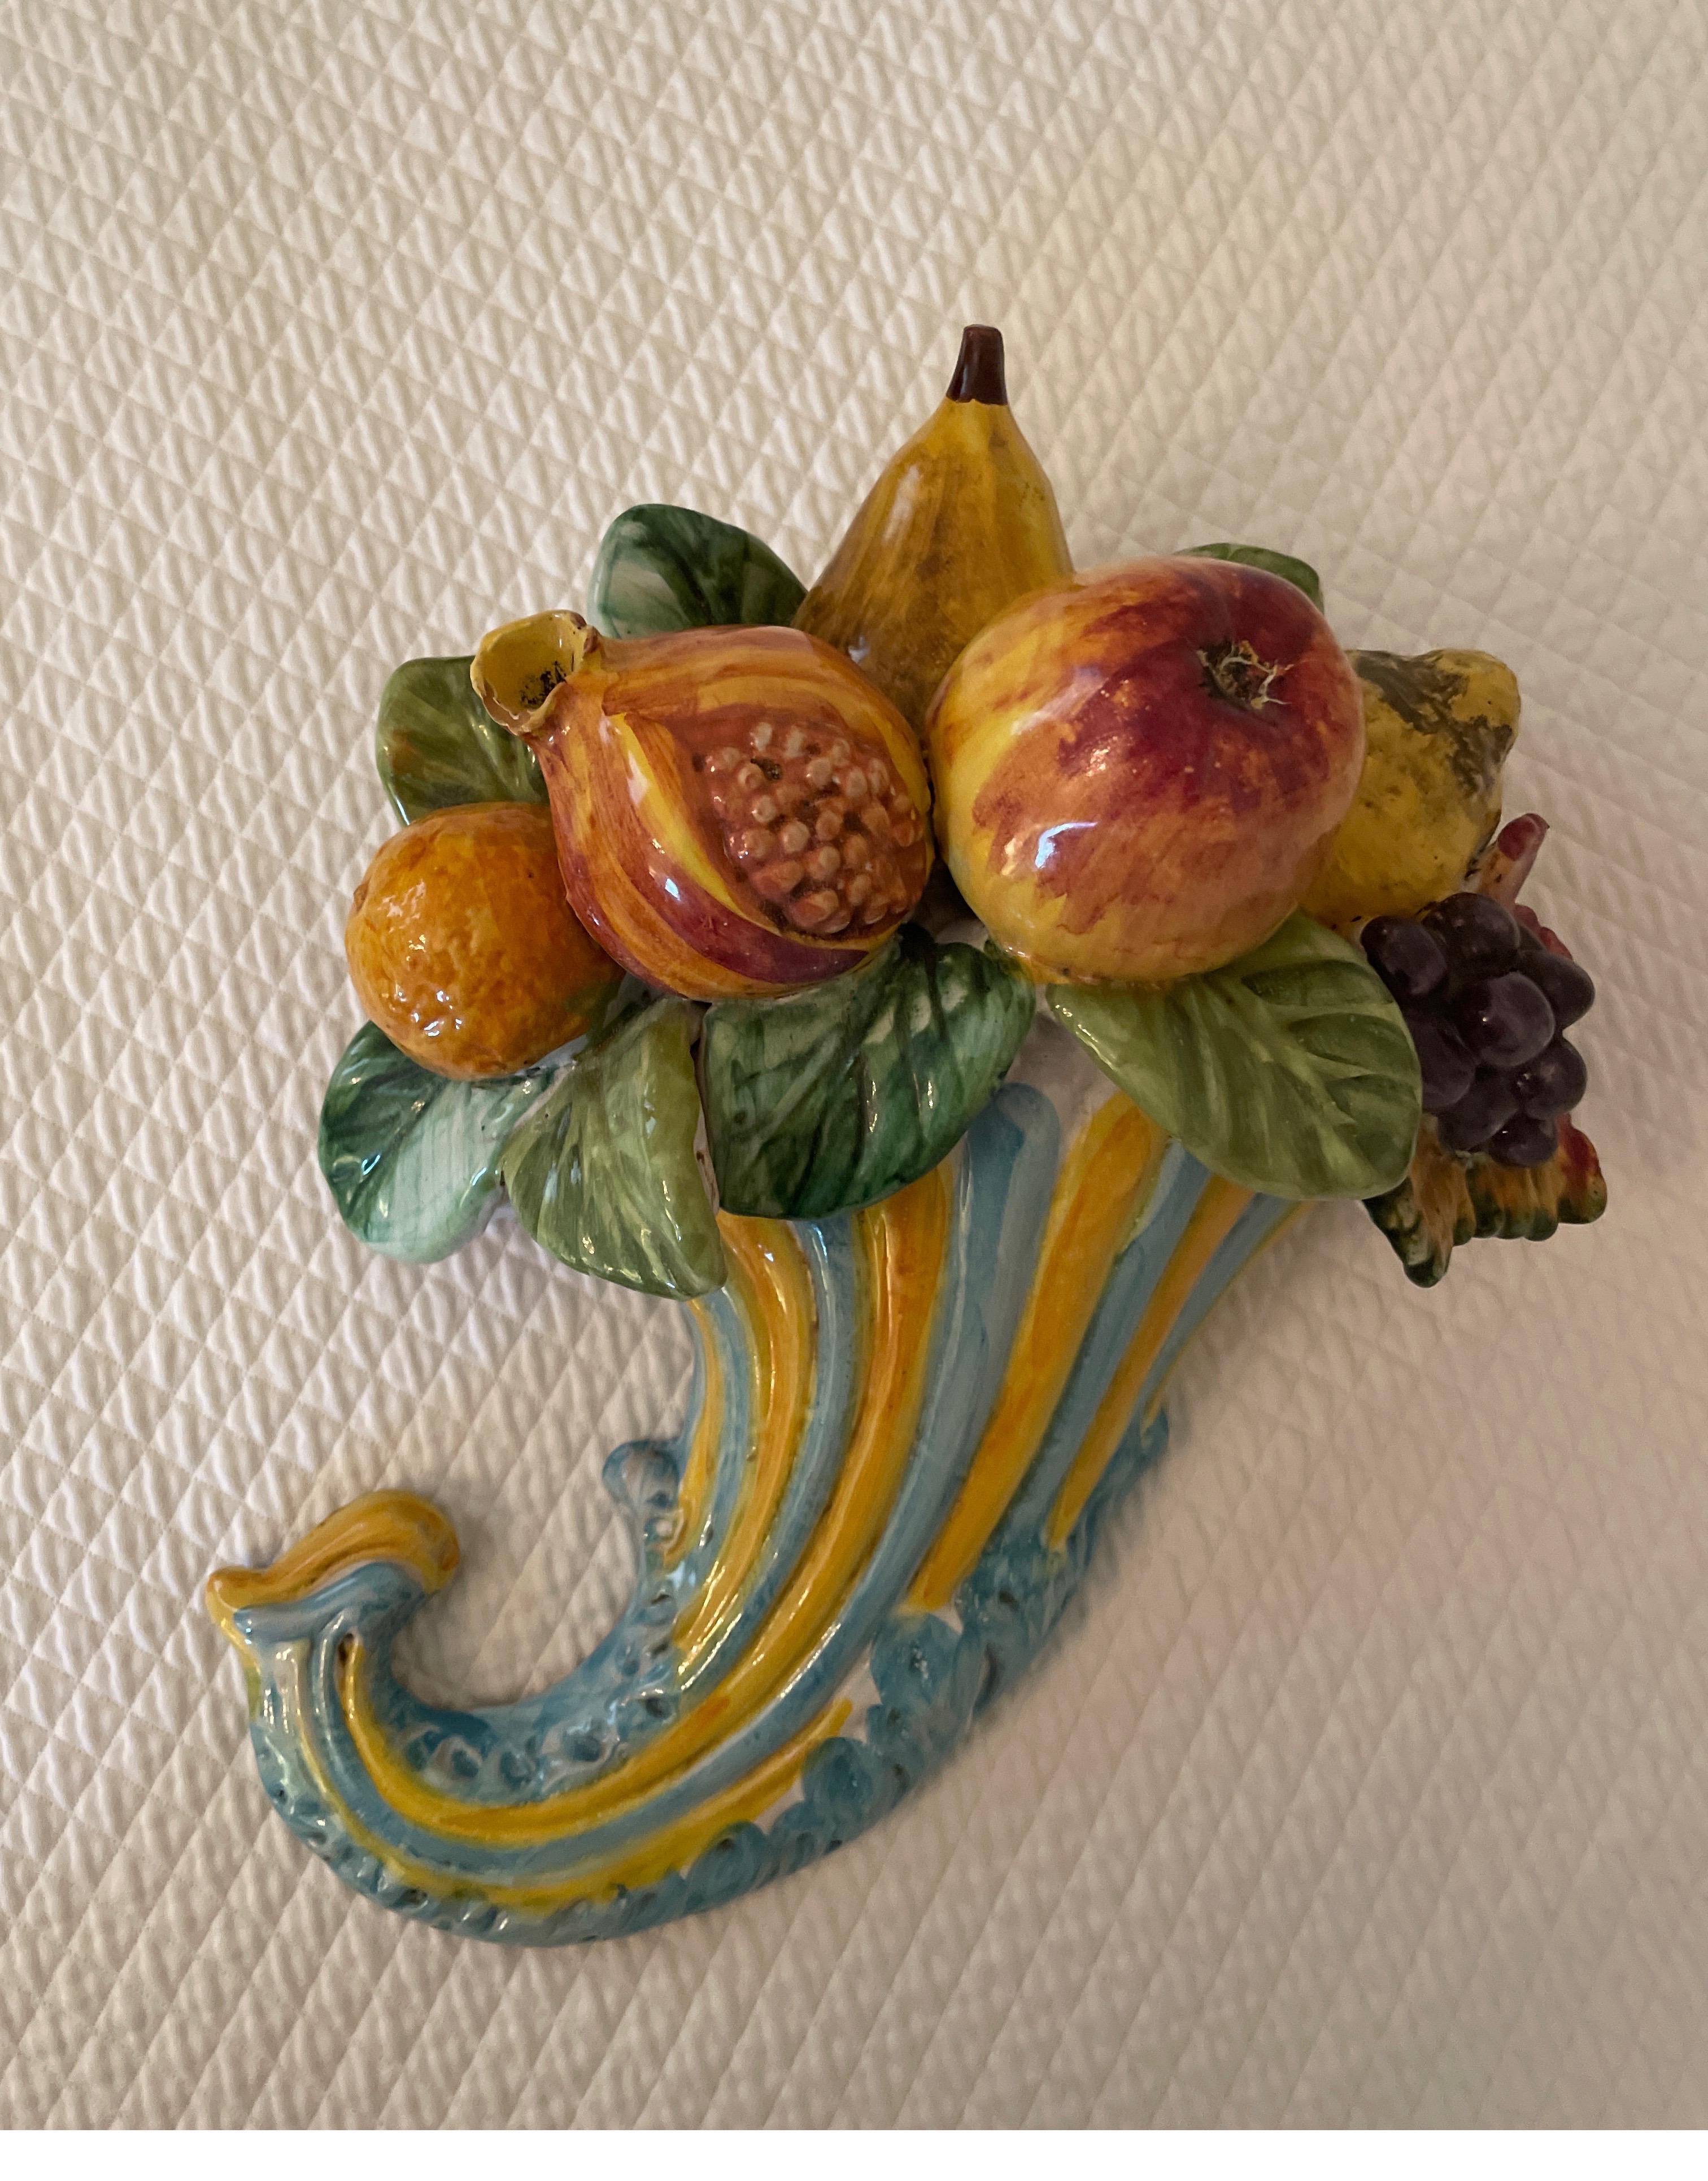 Vintage multicolored terra cotta cornucopia wall hanging of assorted fruits. Very pretty piece for a kitchen / breakfast room.